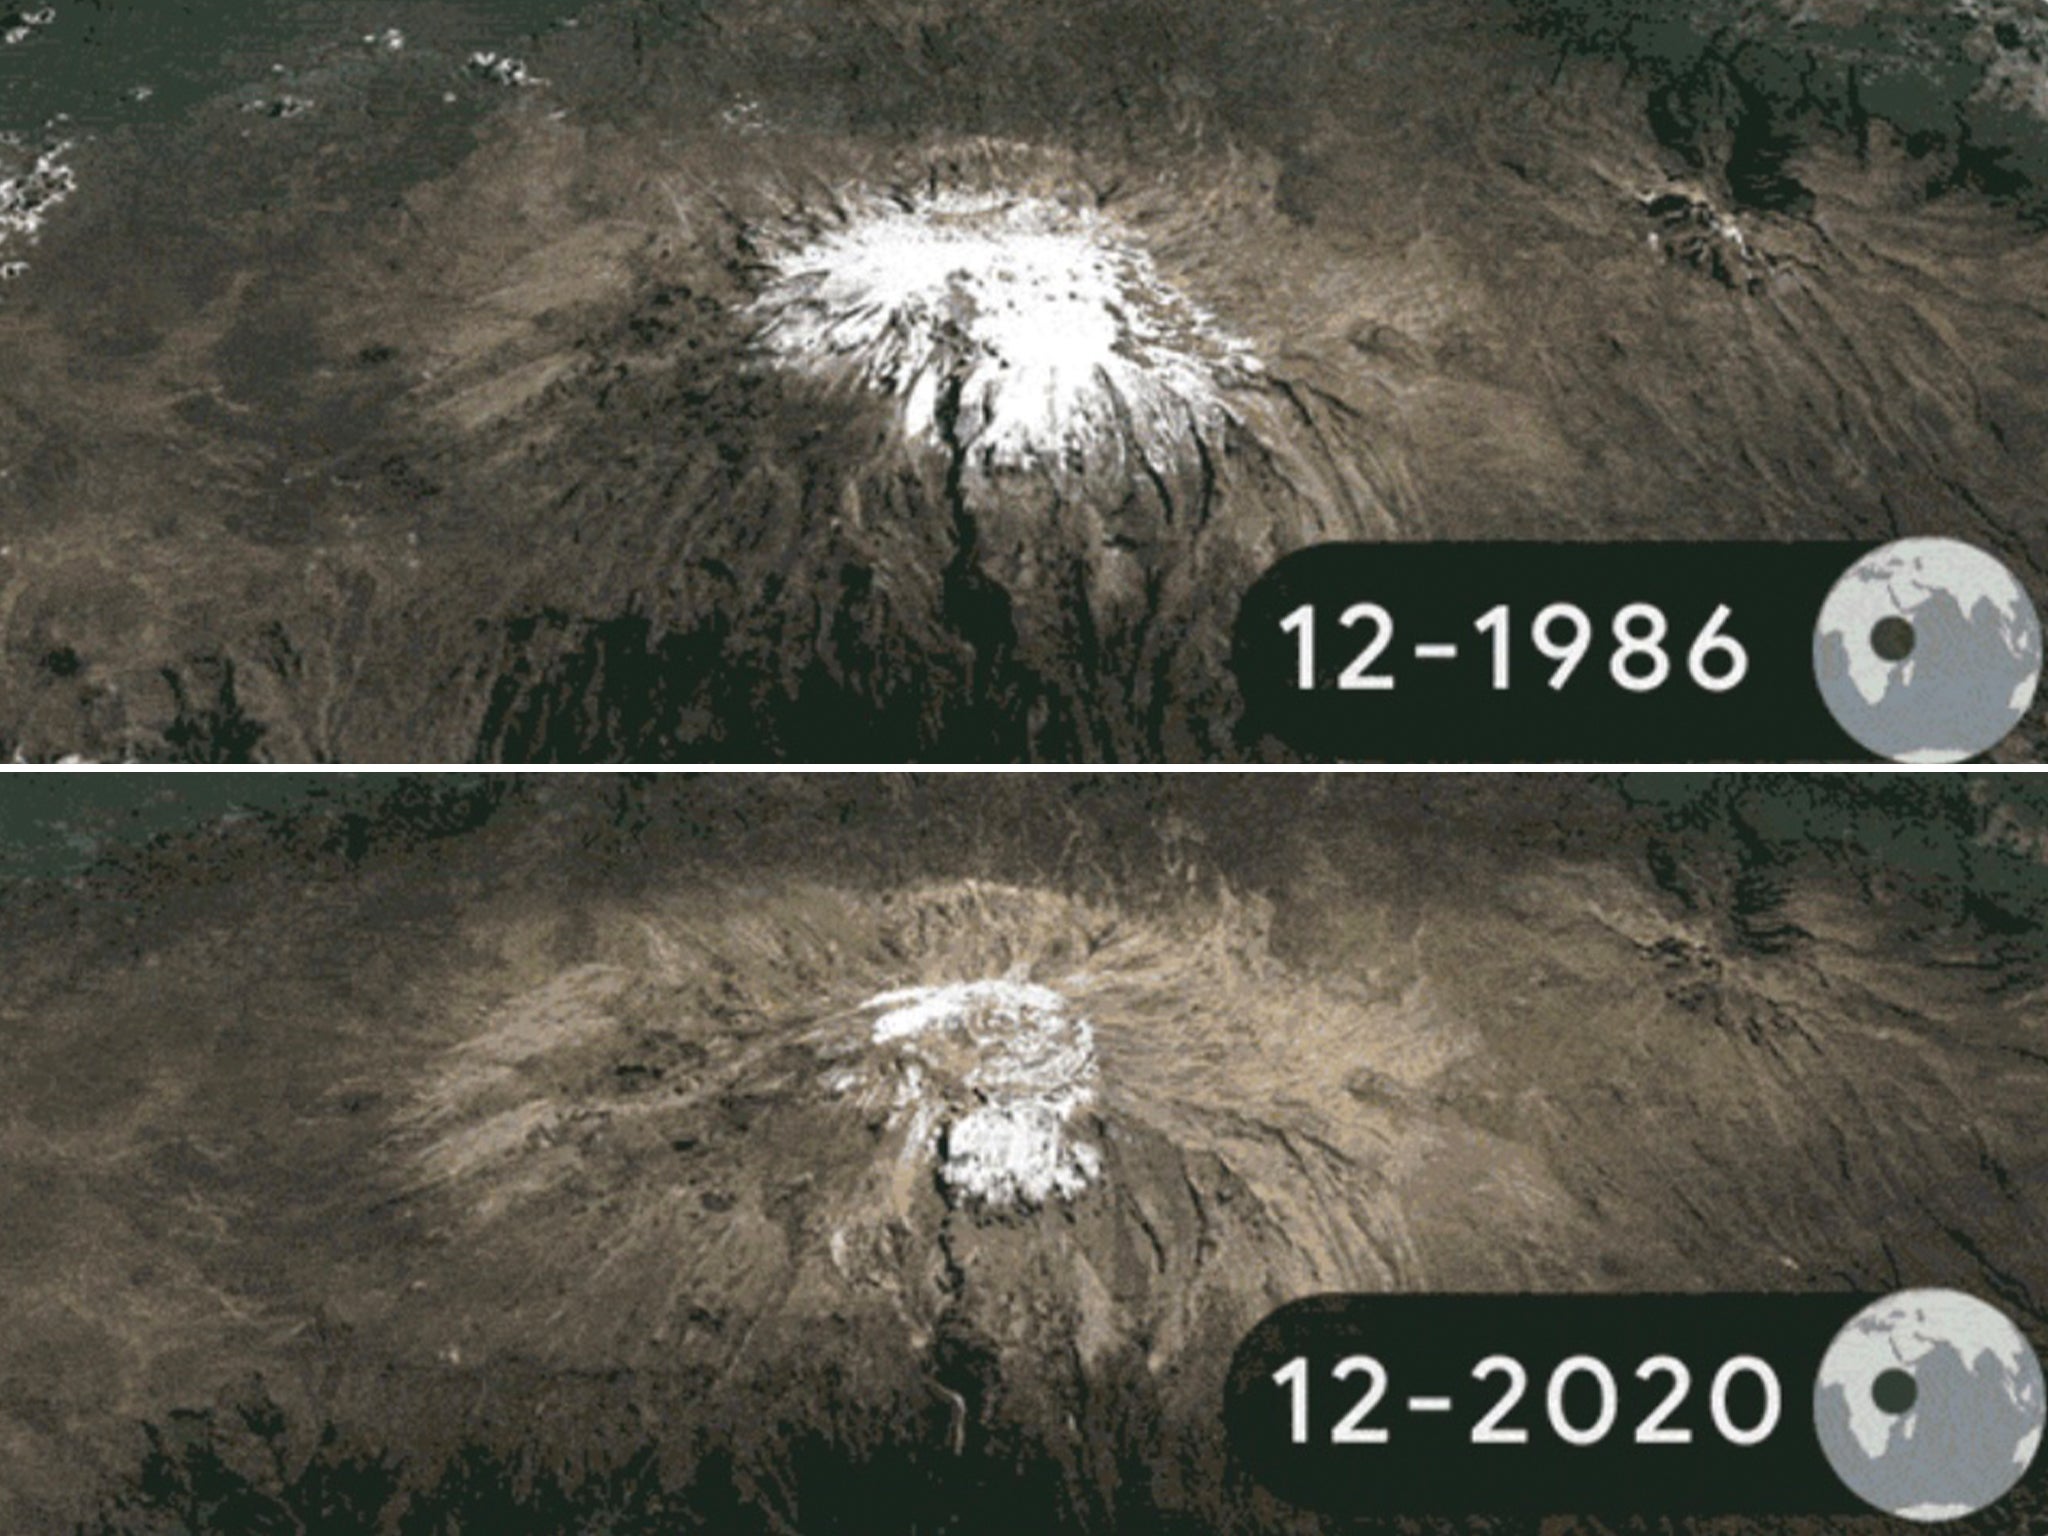 Images taken each December annually from 1986 to 2020 show glacier retreat at the summit of Mt. Kilimanjaro